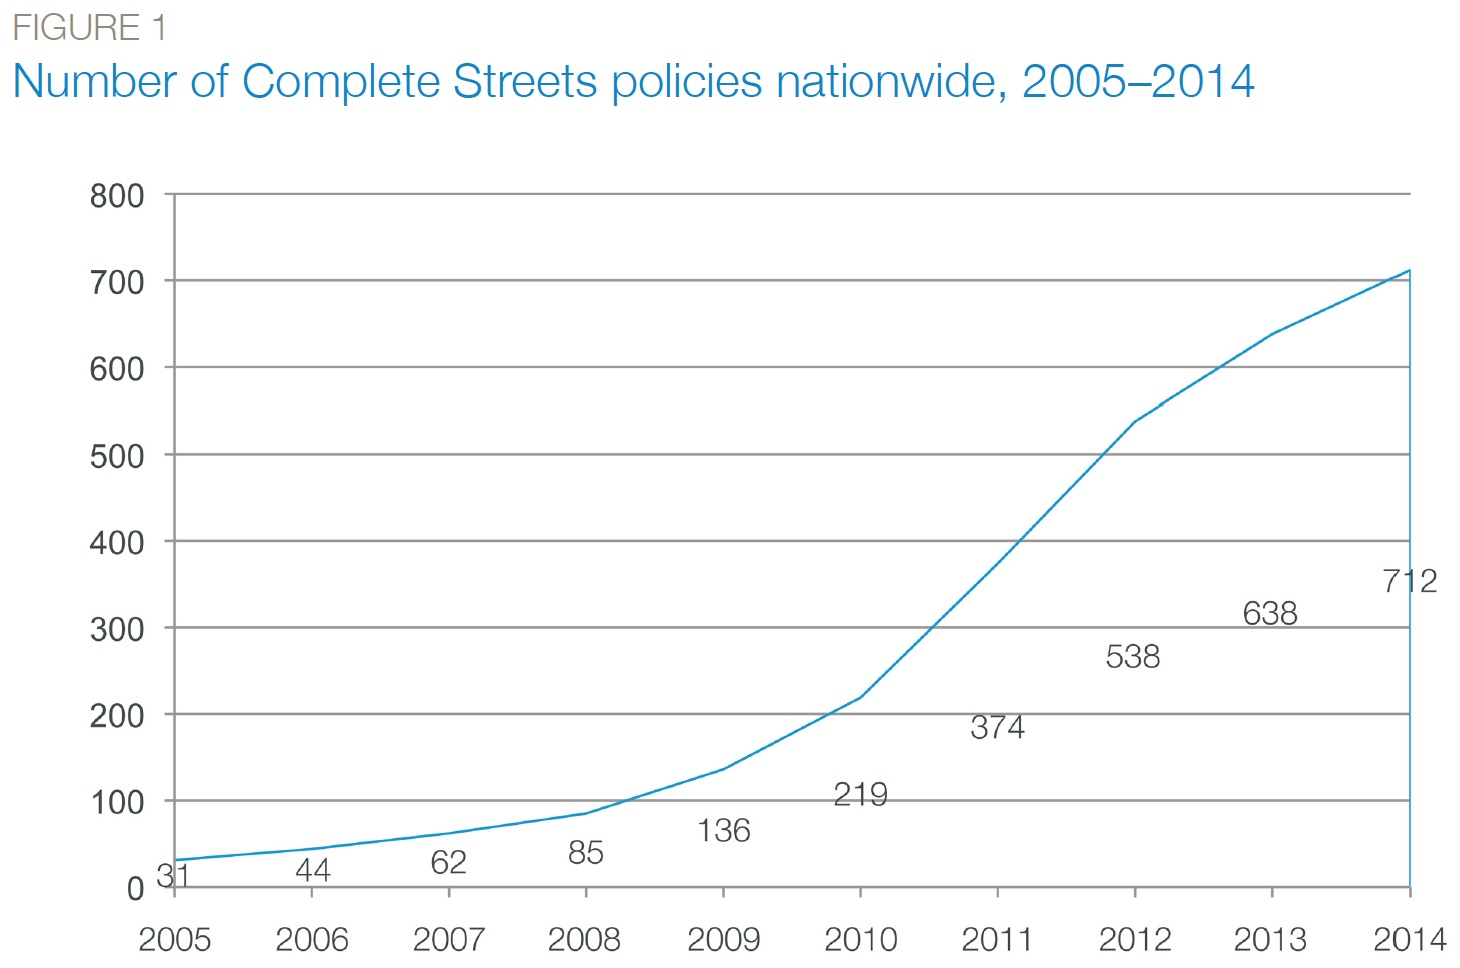 Complete Streets Policies Network